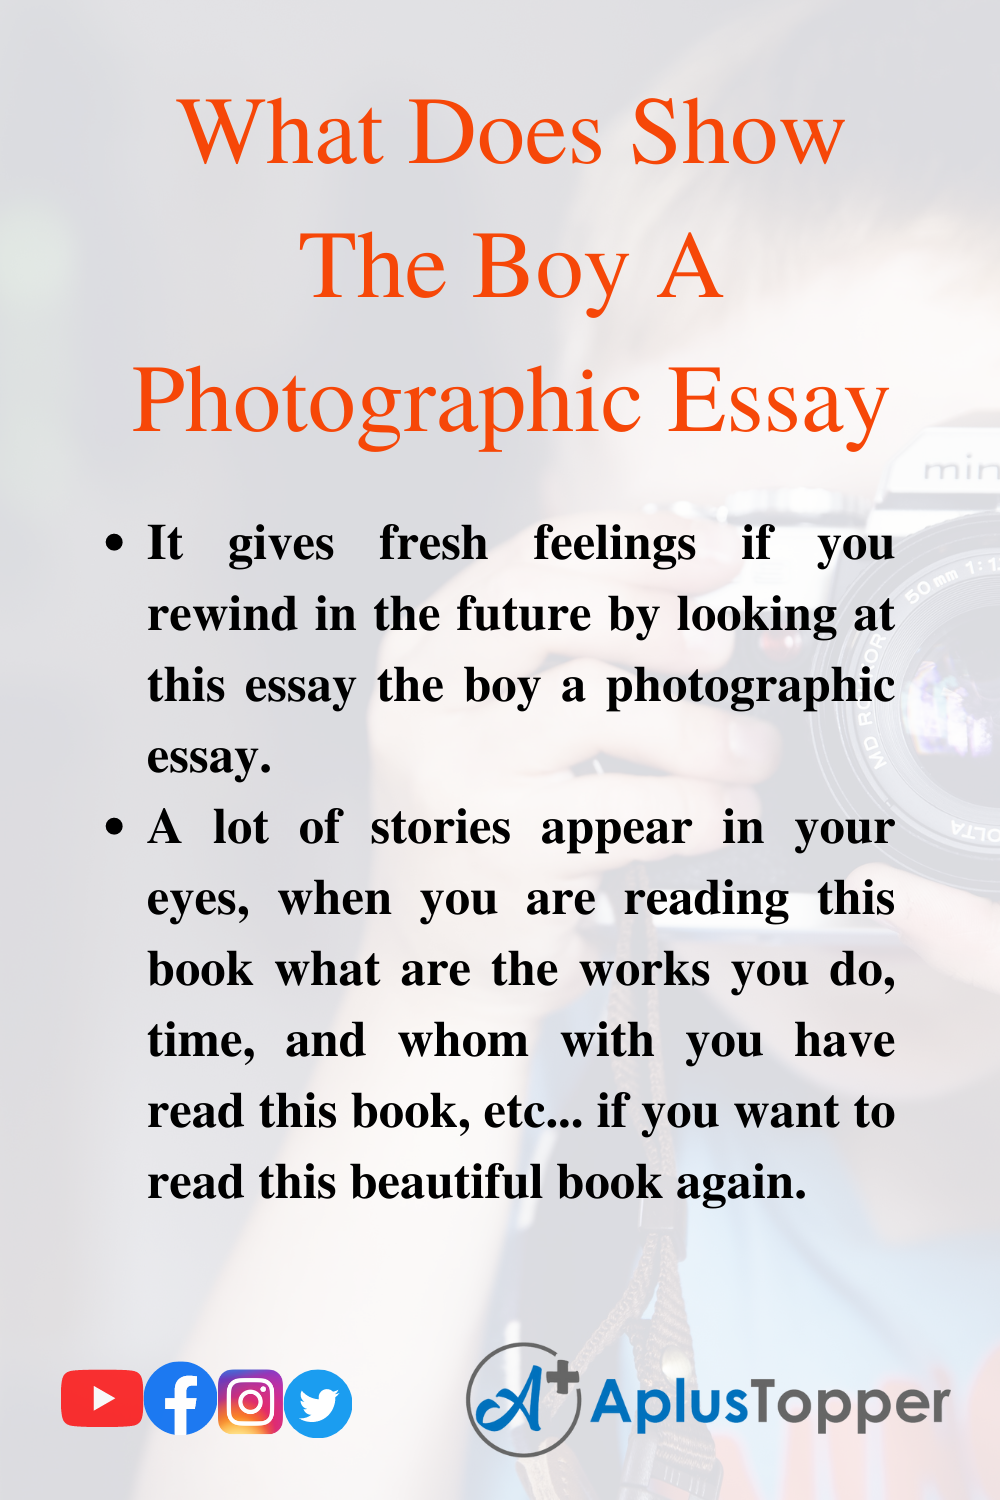 What Does Show The Boy A Photographic Essay